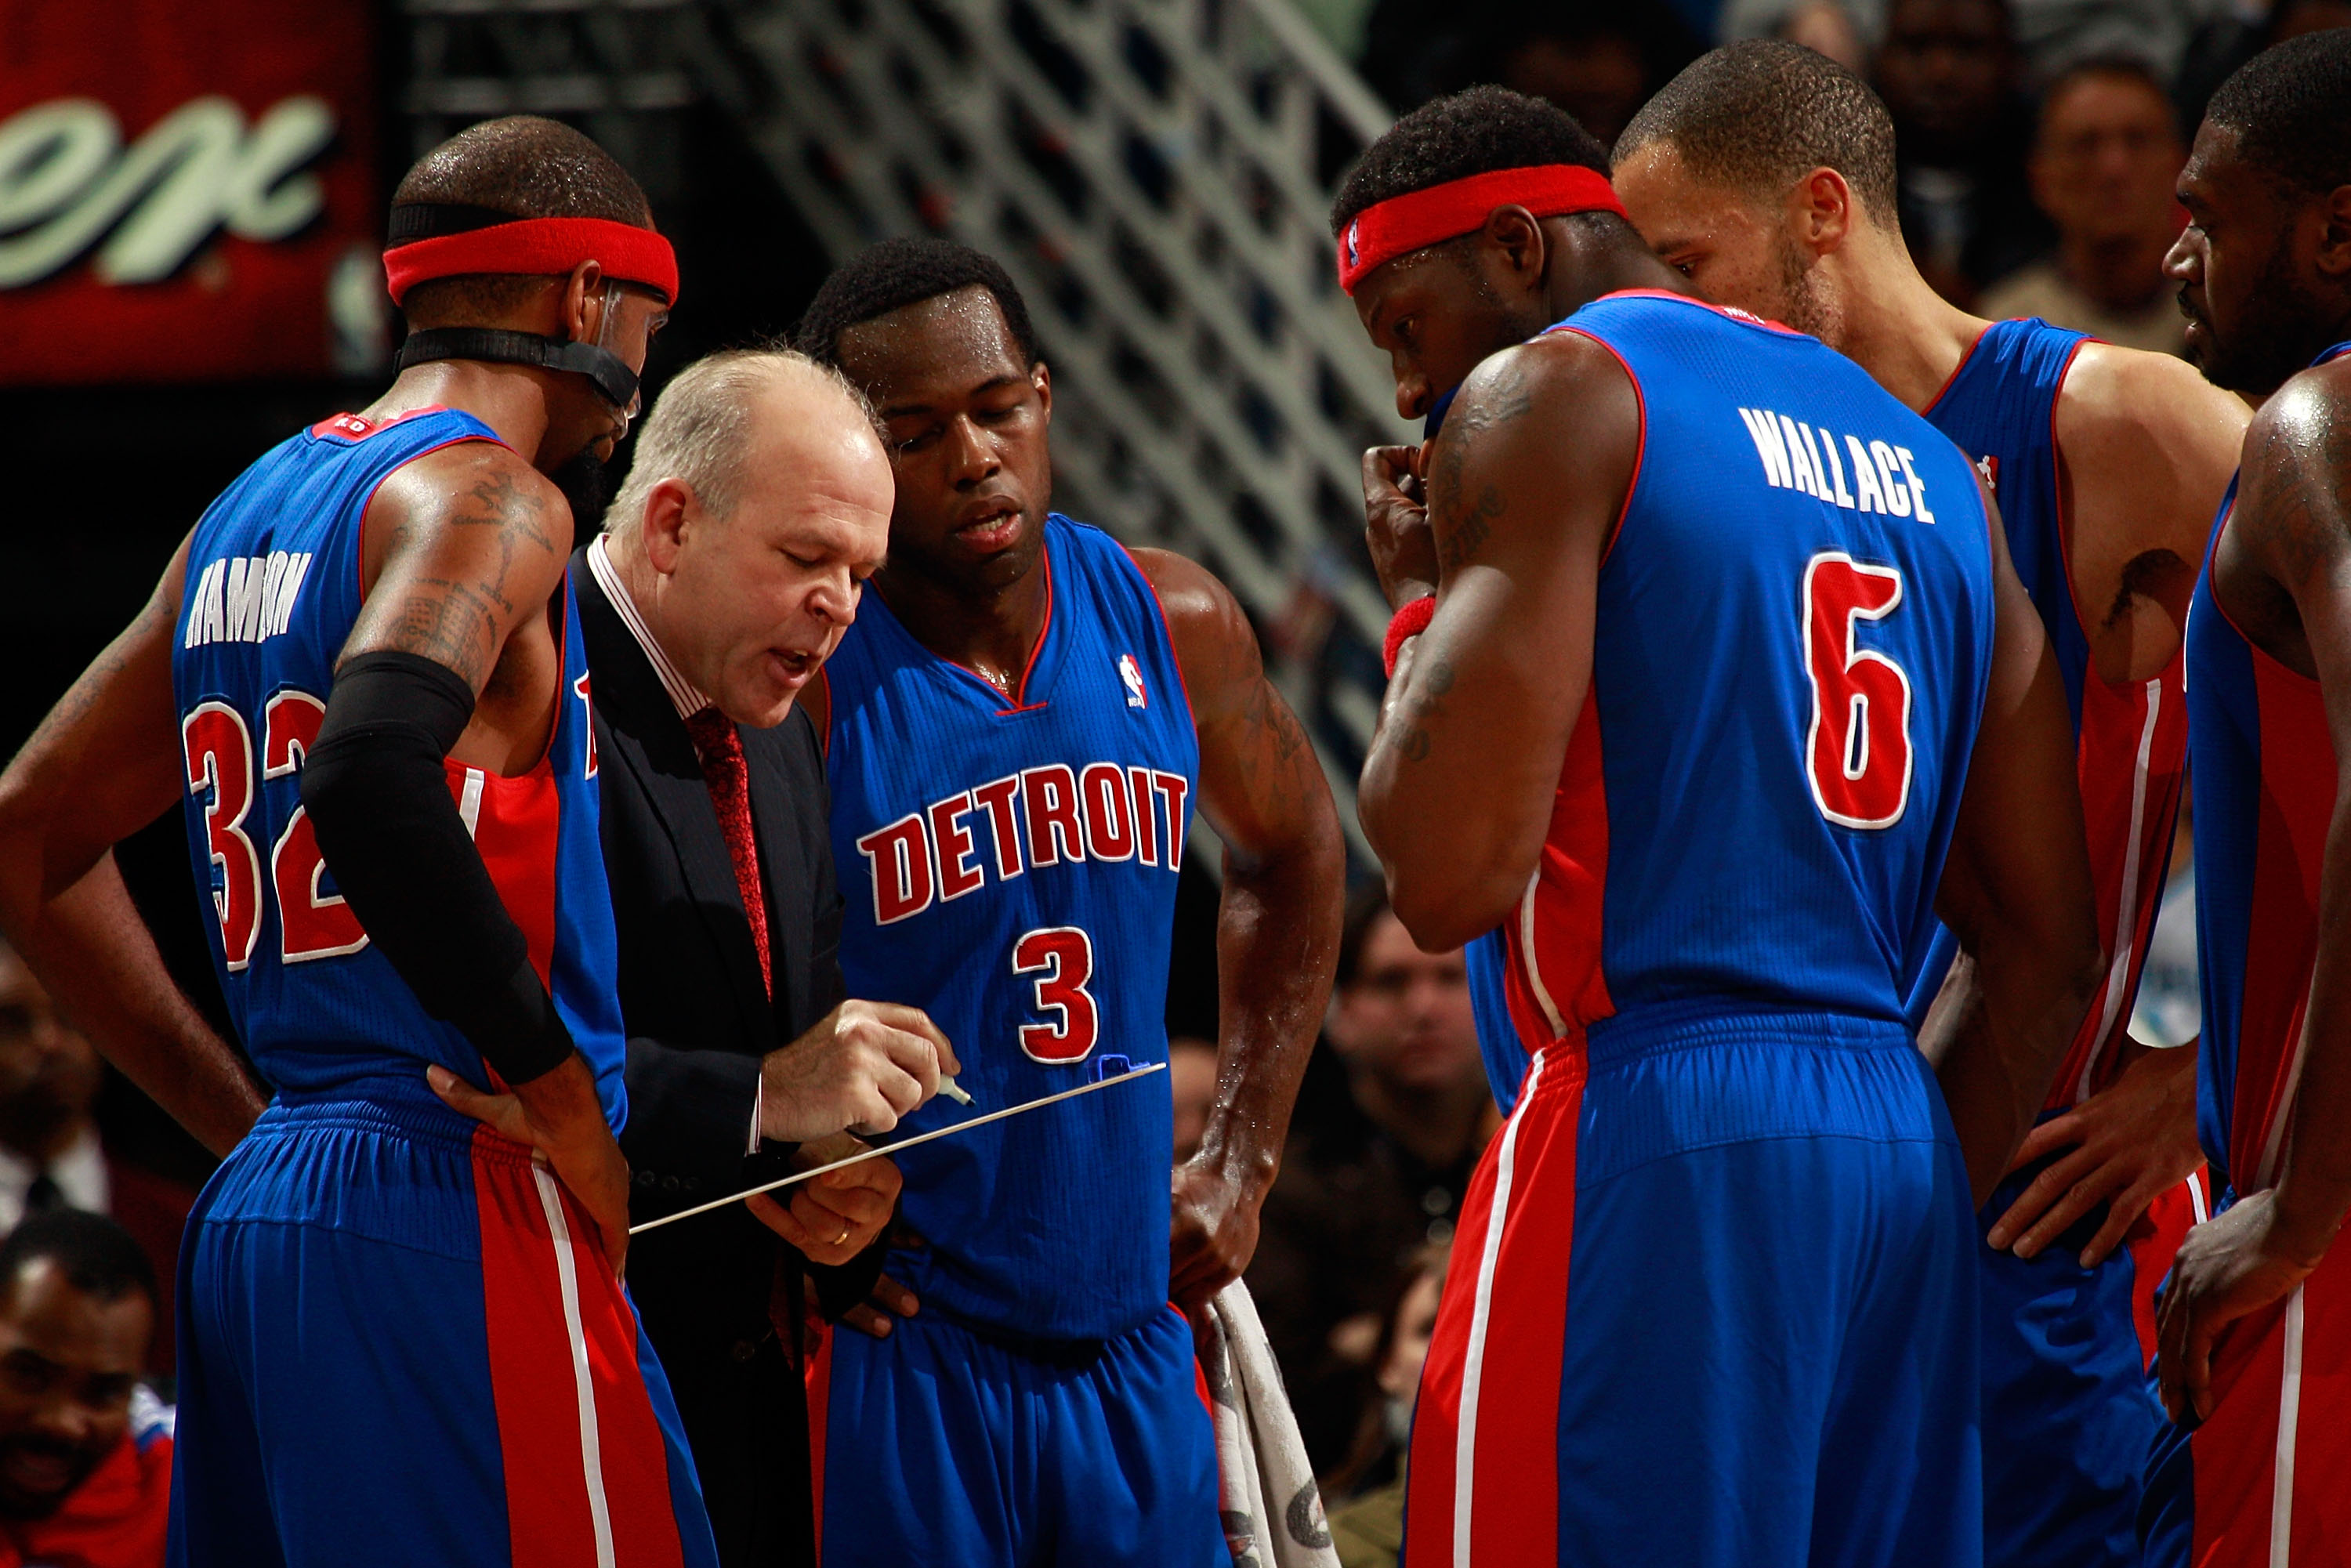 NEW ORLEANS, LA - DECEMBER 08:  Head coach John Keuster of the Detroit Pistons talks with his team during a time out against the New Orleans Hornets at the New Orleans Arena on December 8, 2010 in New Orleans, Louisiana.  NOTE TO USER: User expressly ackn